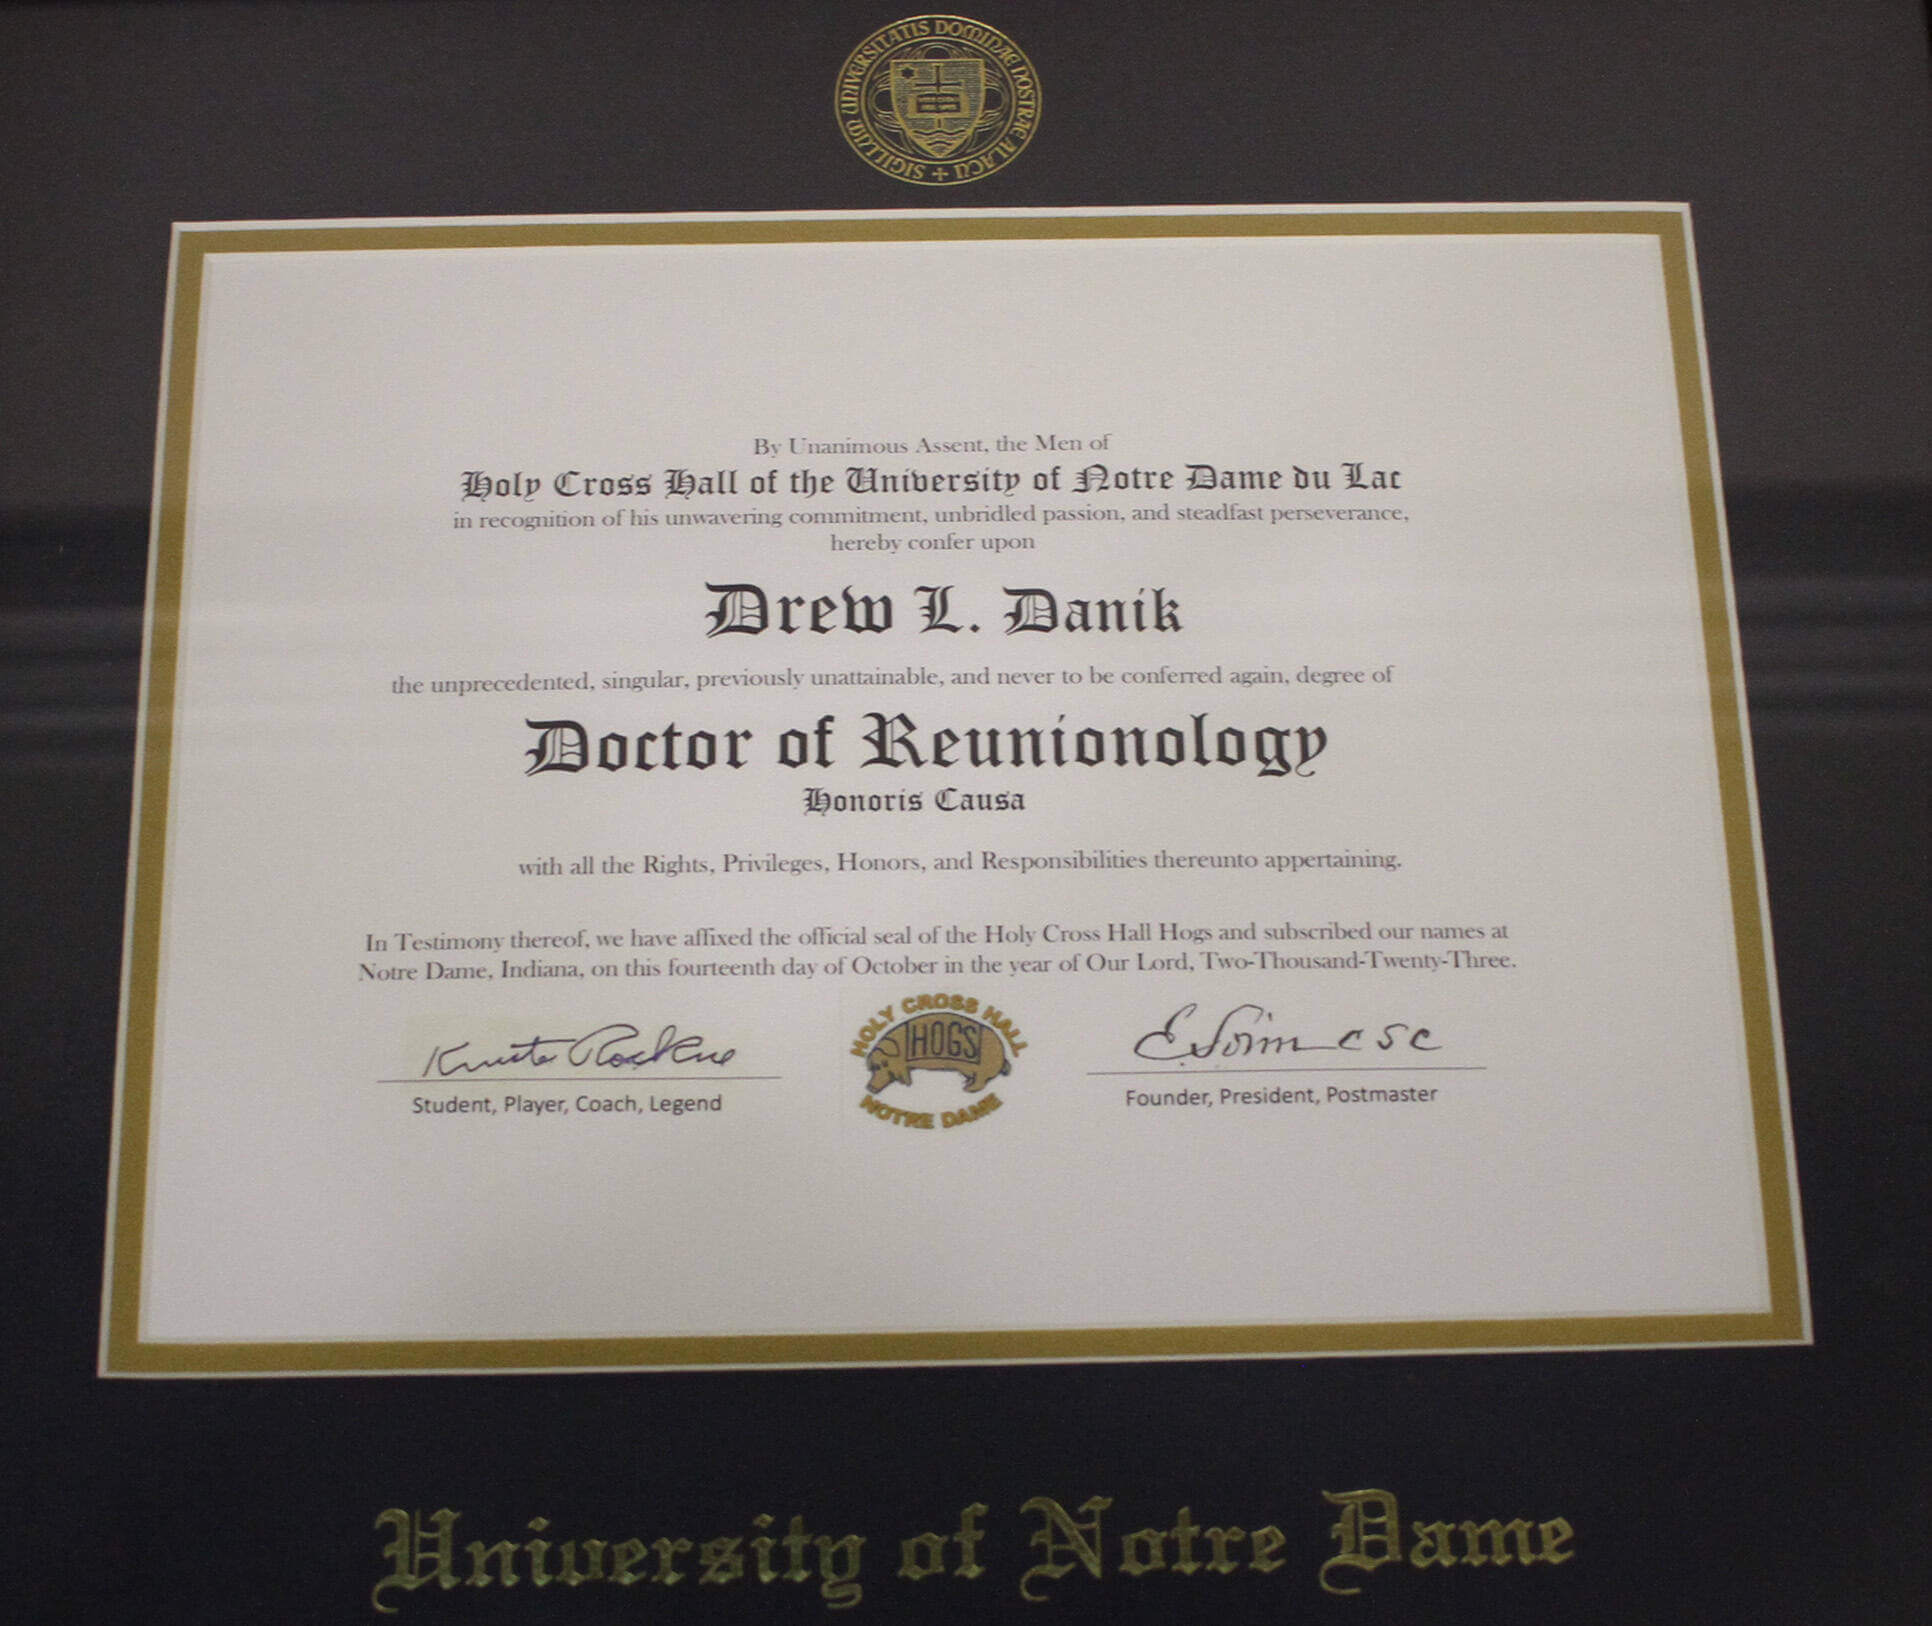 A diploma identifying Drew Danik as a "Doctor of Reunionology."